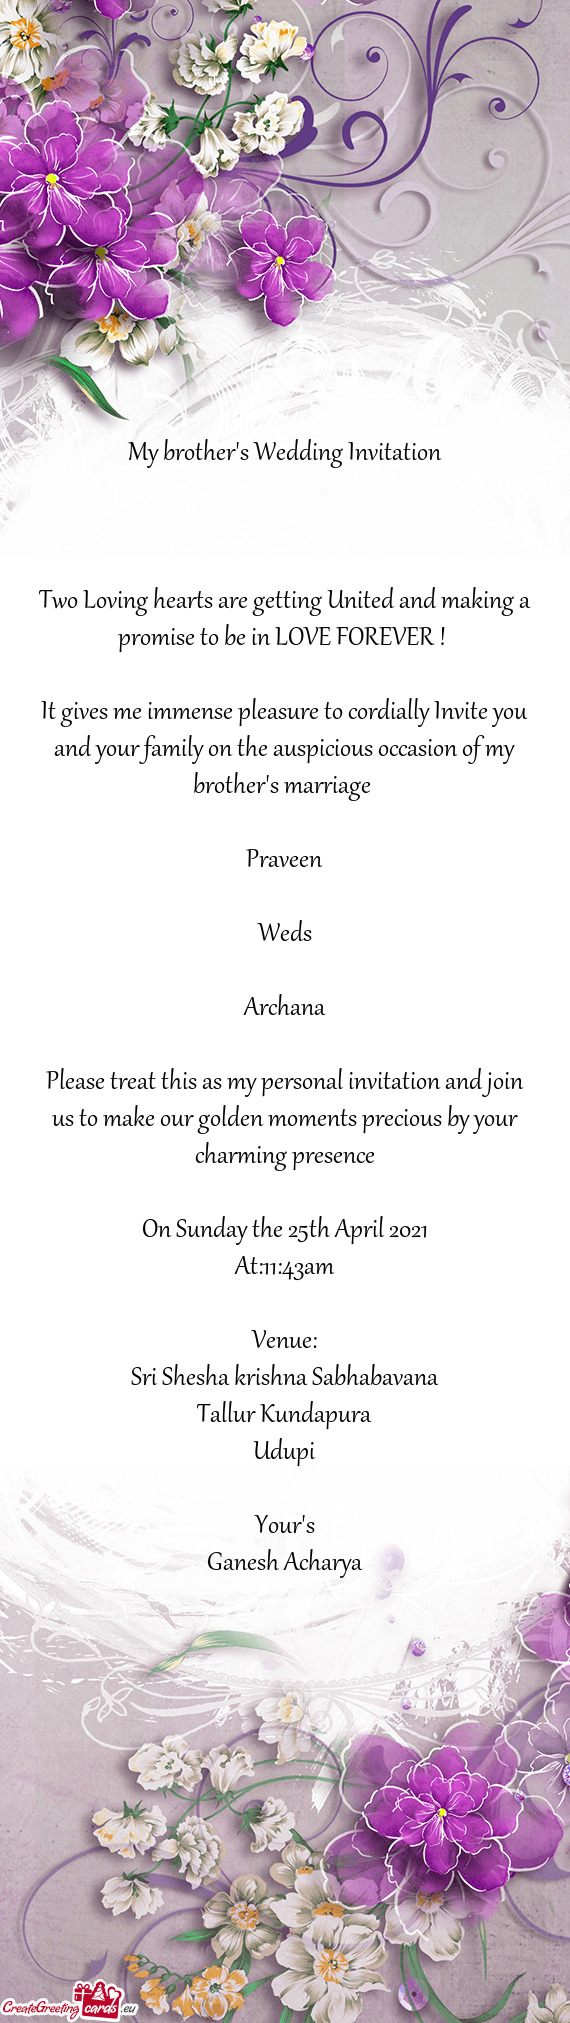 My personal invitation and join us to make our golden moments precious by your charming presence